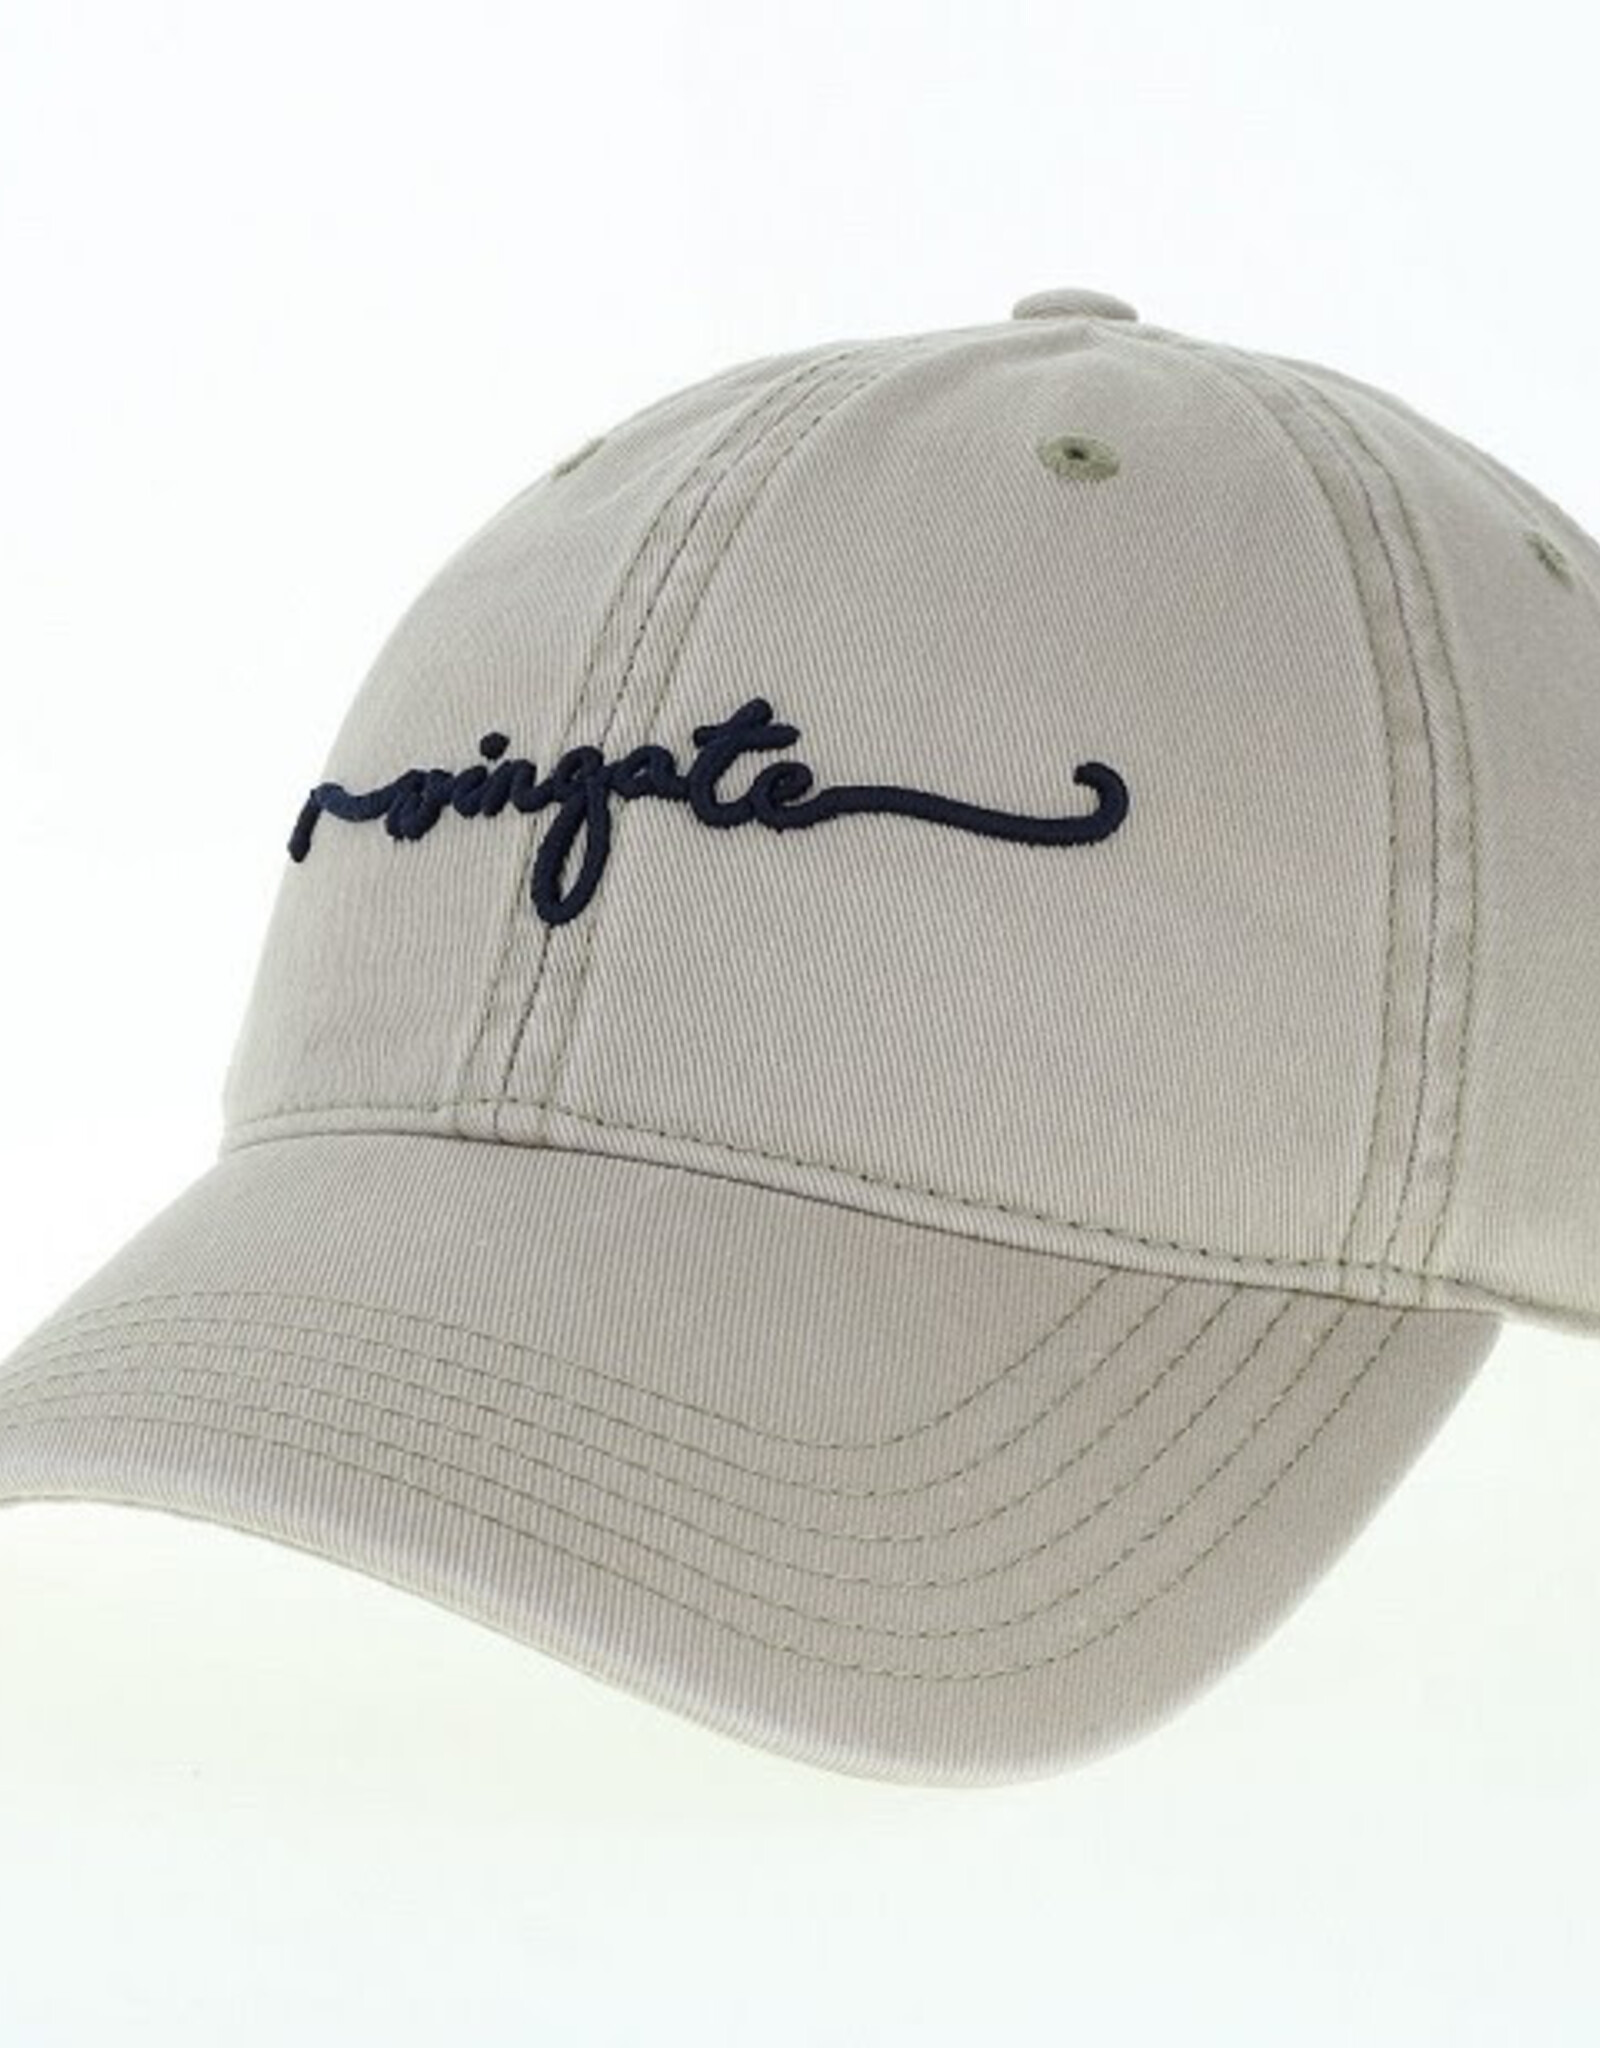 Legacy Khaki Wingate Script Relaxed Twill Unstructured Adjustable Hat